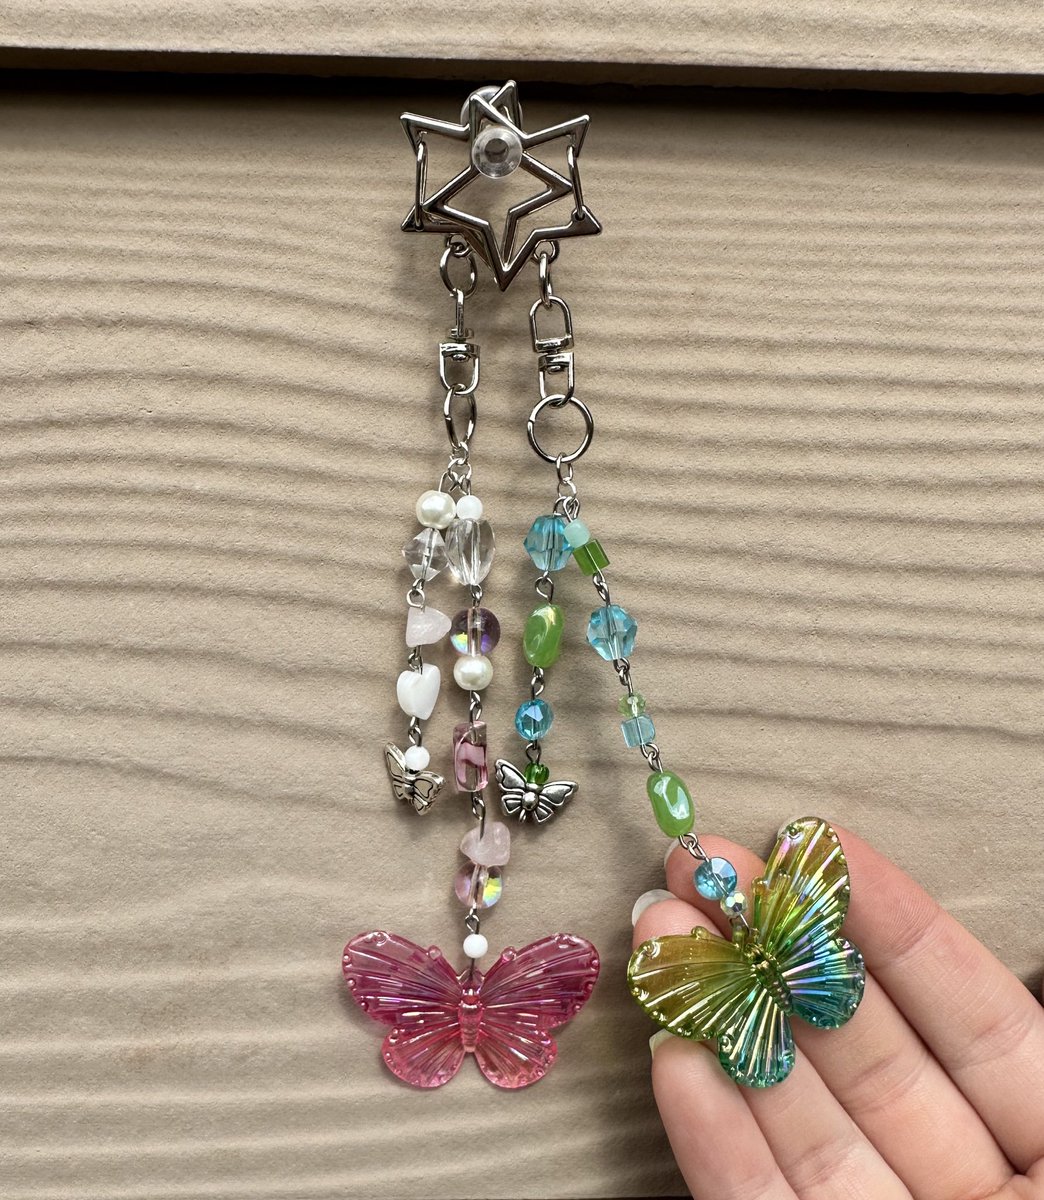 ˳·˖✶ butterfly matching keychains ✶˖·˳

˳·˖✶ 6 a piece, 10 for set ✶˖·˳

˳·˖✶ tag someone you’d match with ✶˖·˳

˳·˖✶ #butterfly #jewelry #jewelrymaking #coquette #delicatejewelry #stargirl ✶˖·˳